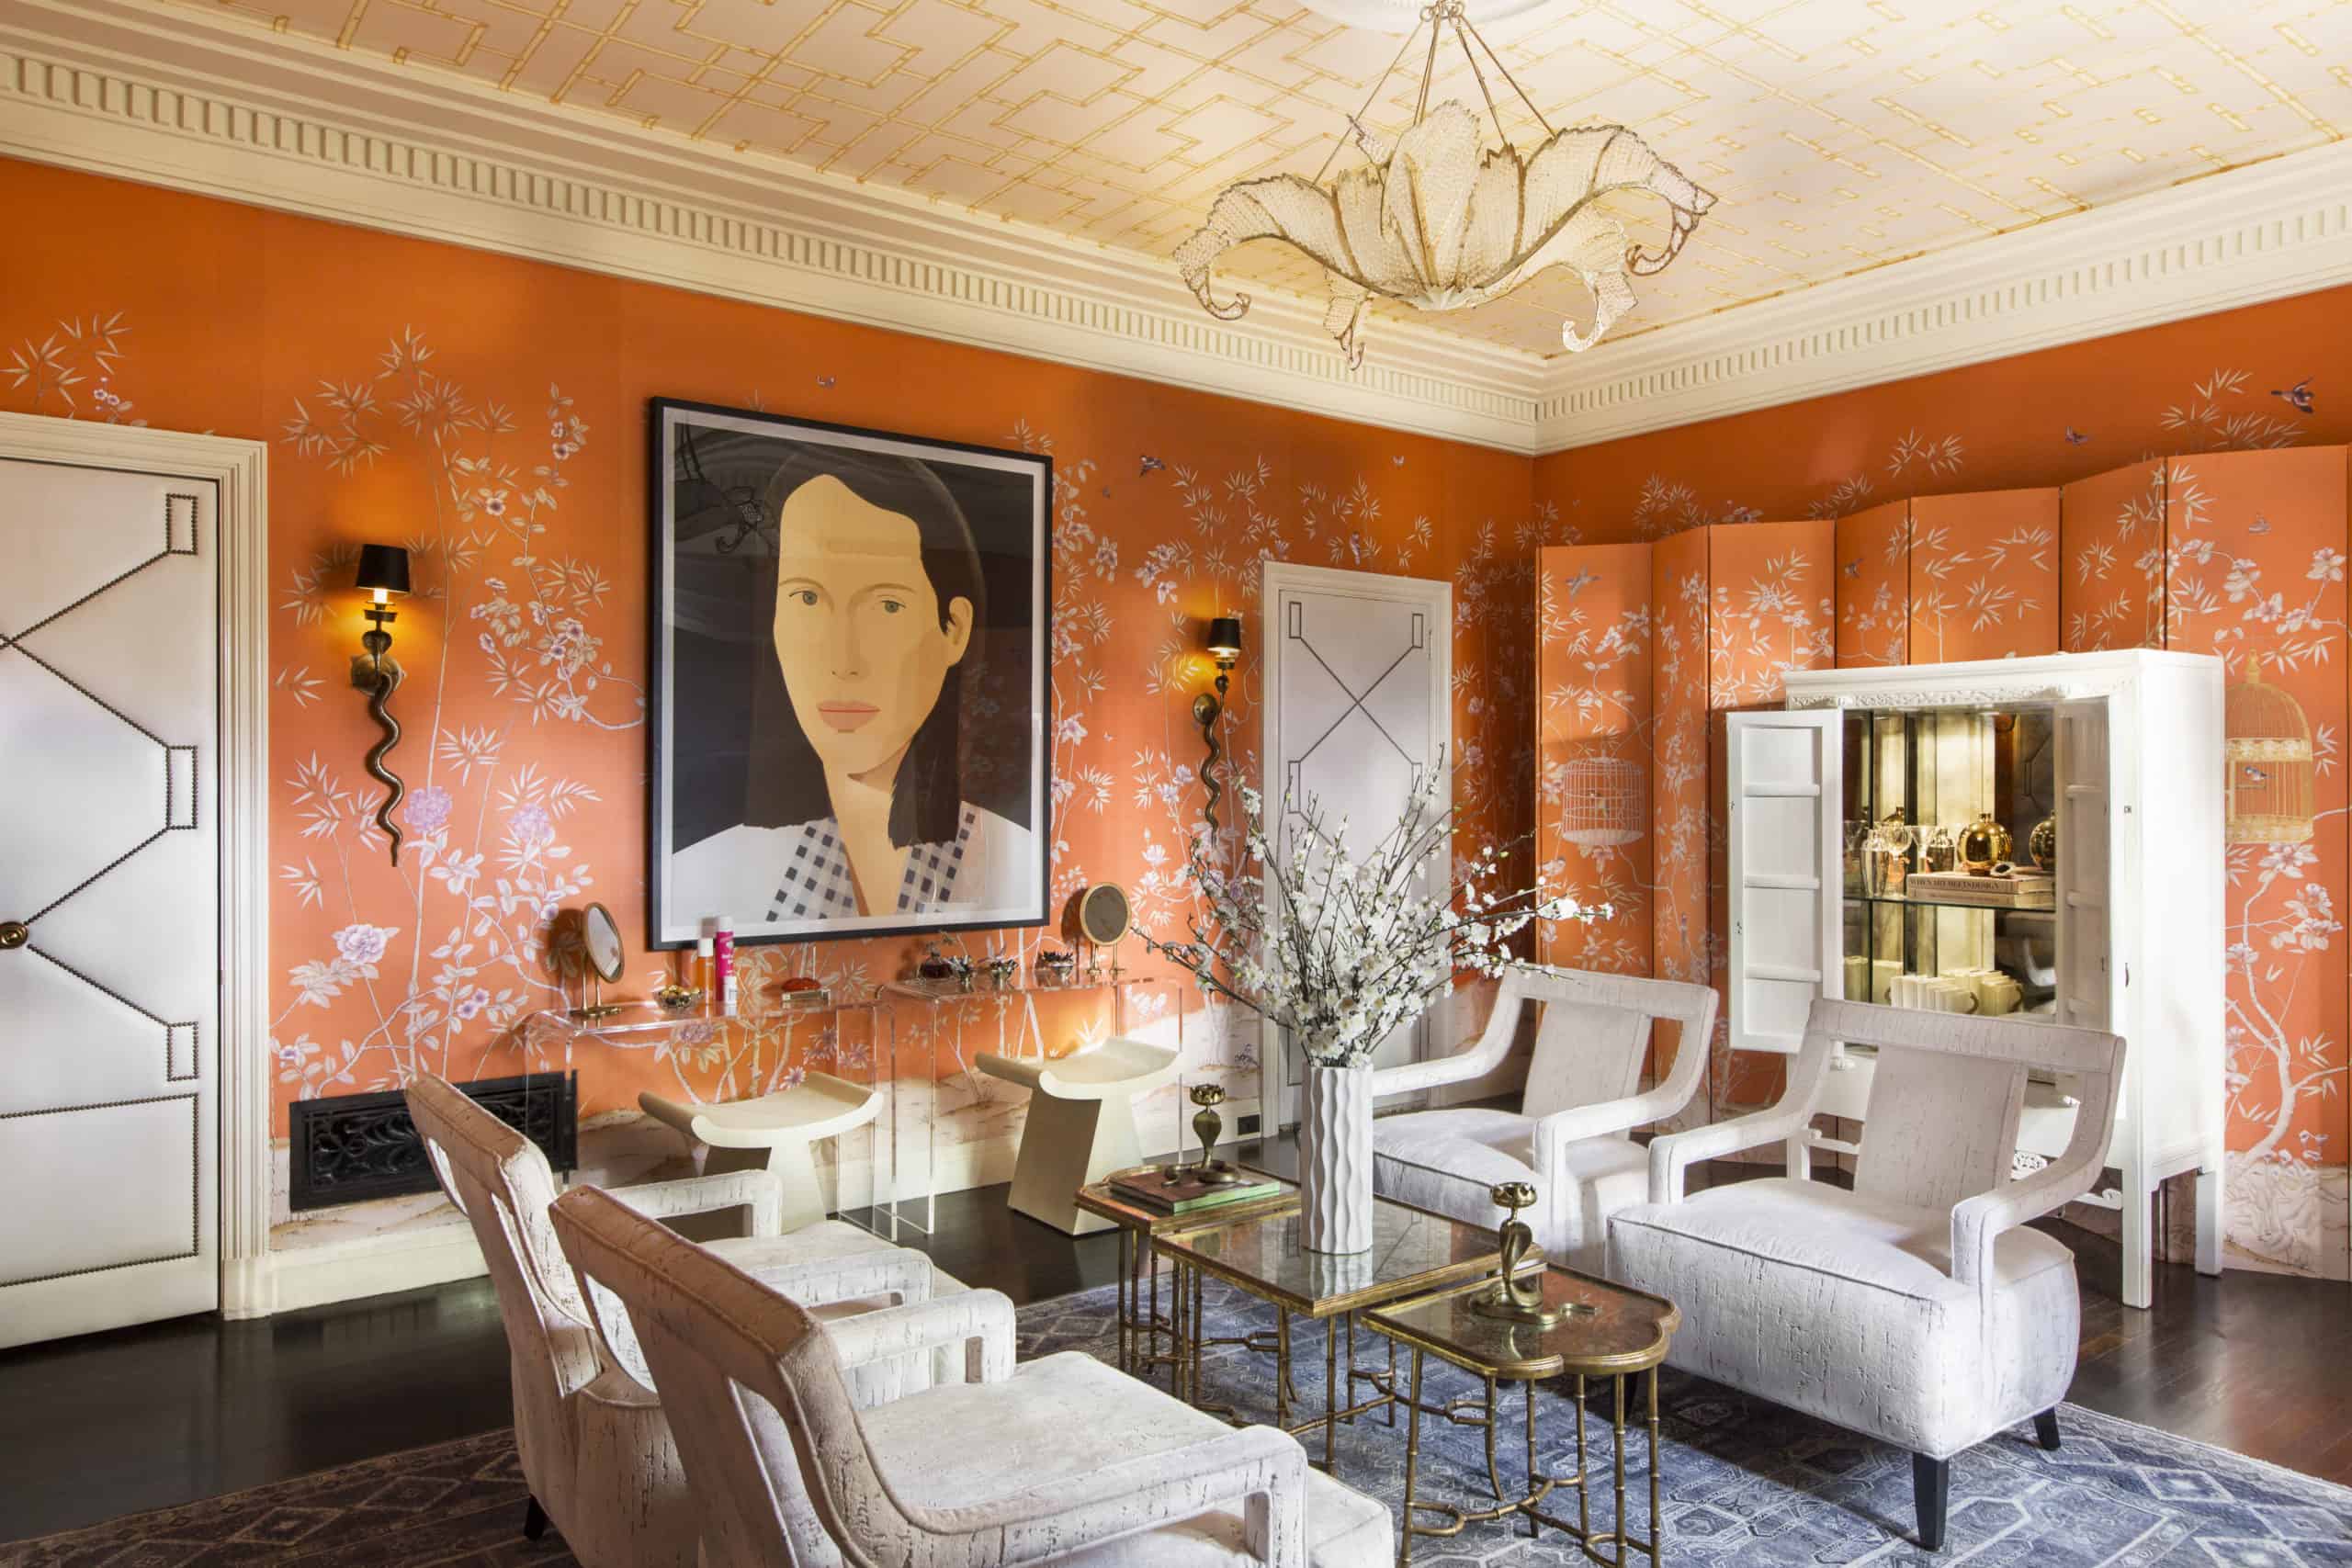 Greystone Mansion dining room with orange wallpaper, ceiling wallcovering, and wallpapered panel accents